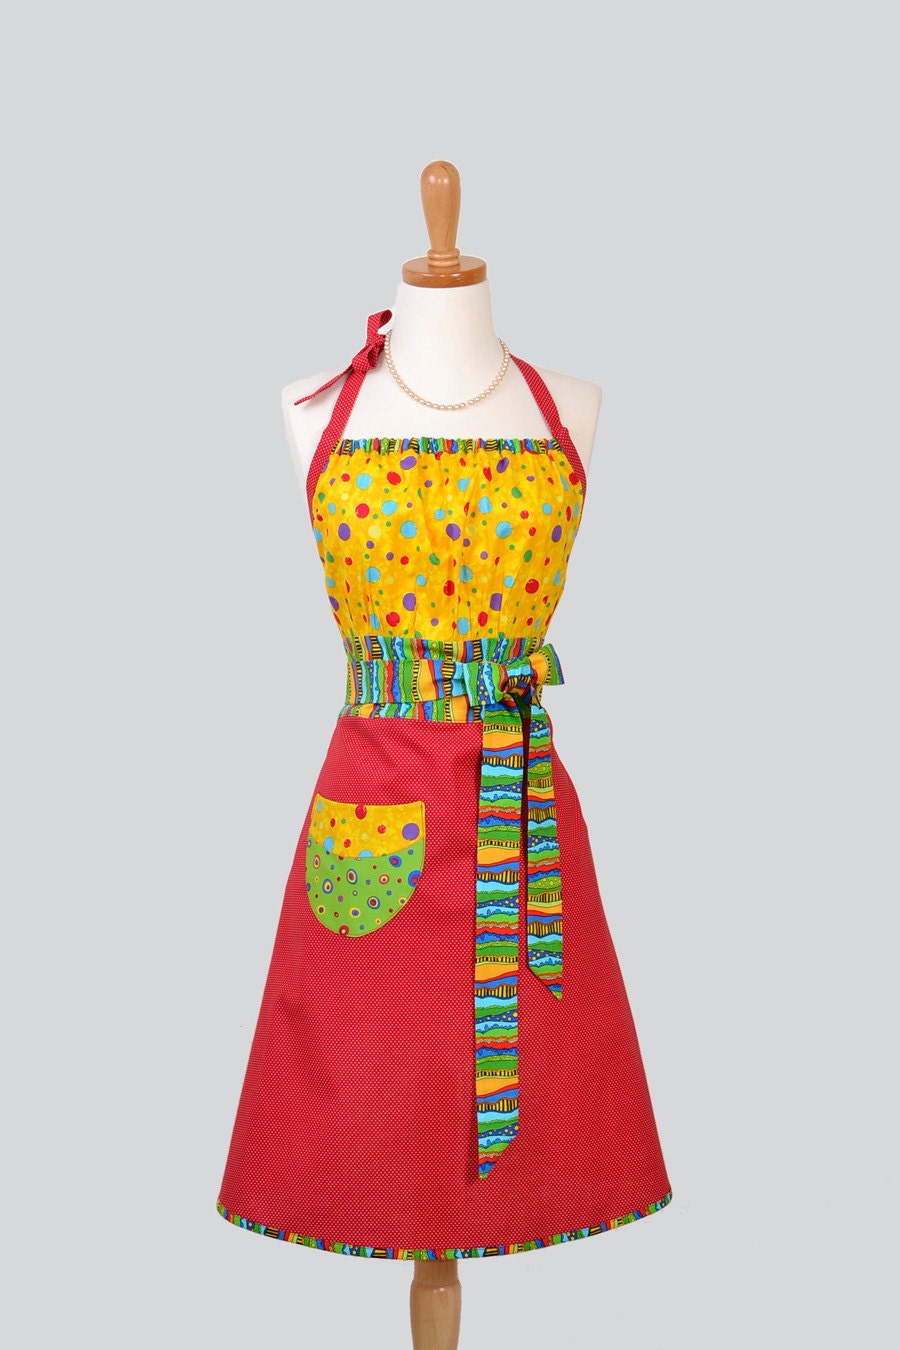 Cute Kitsch Apron , Modern Design Timeless Treasures Retro Dots and Red Pin Dots